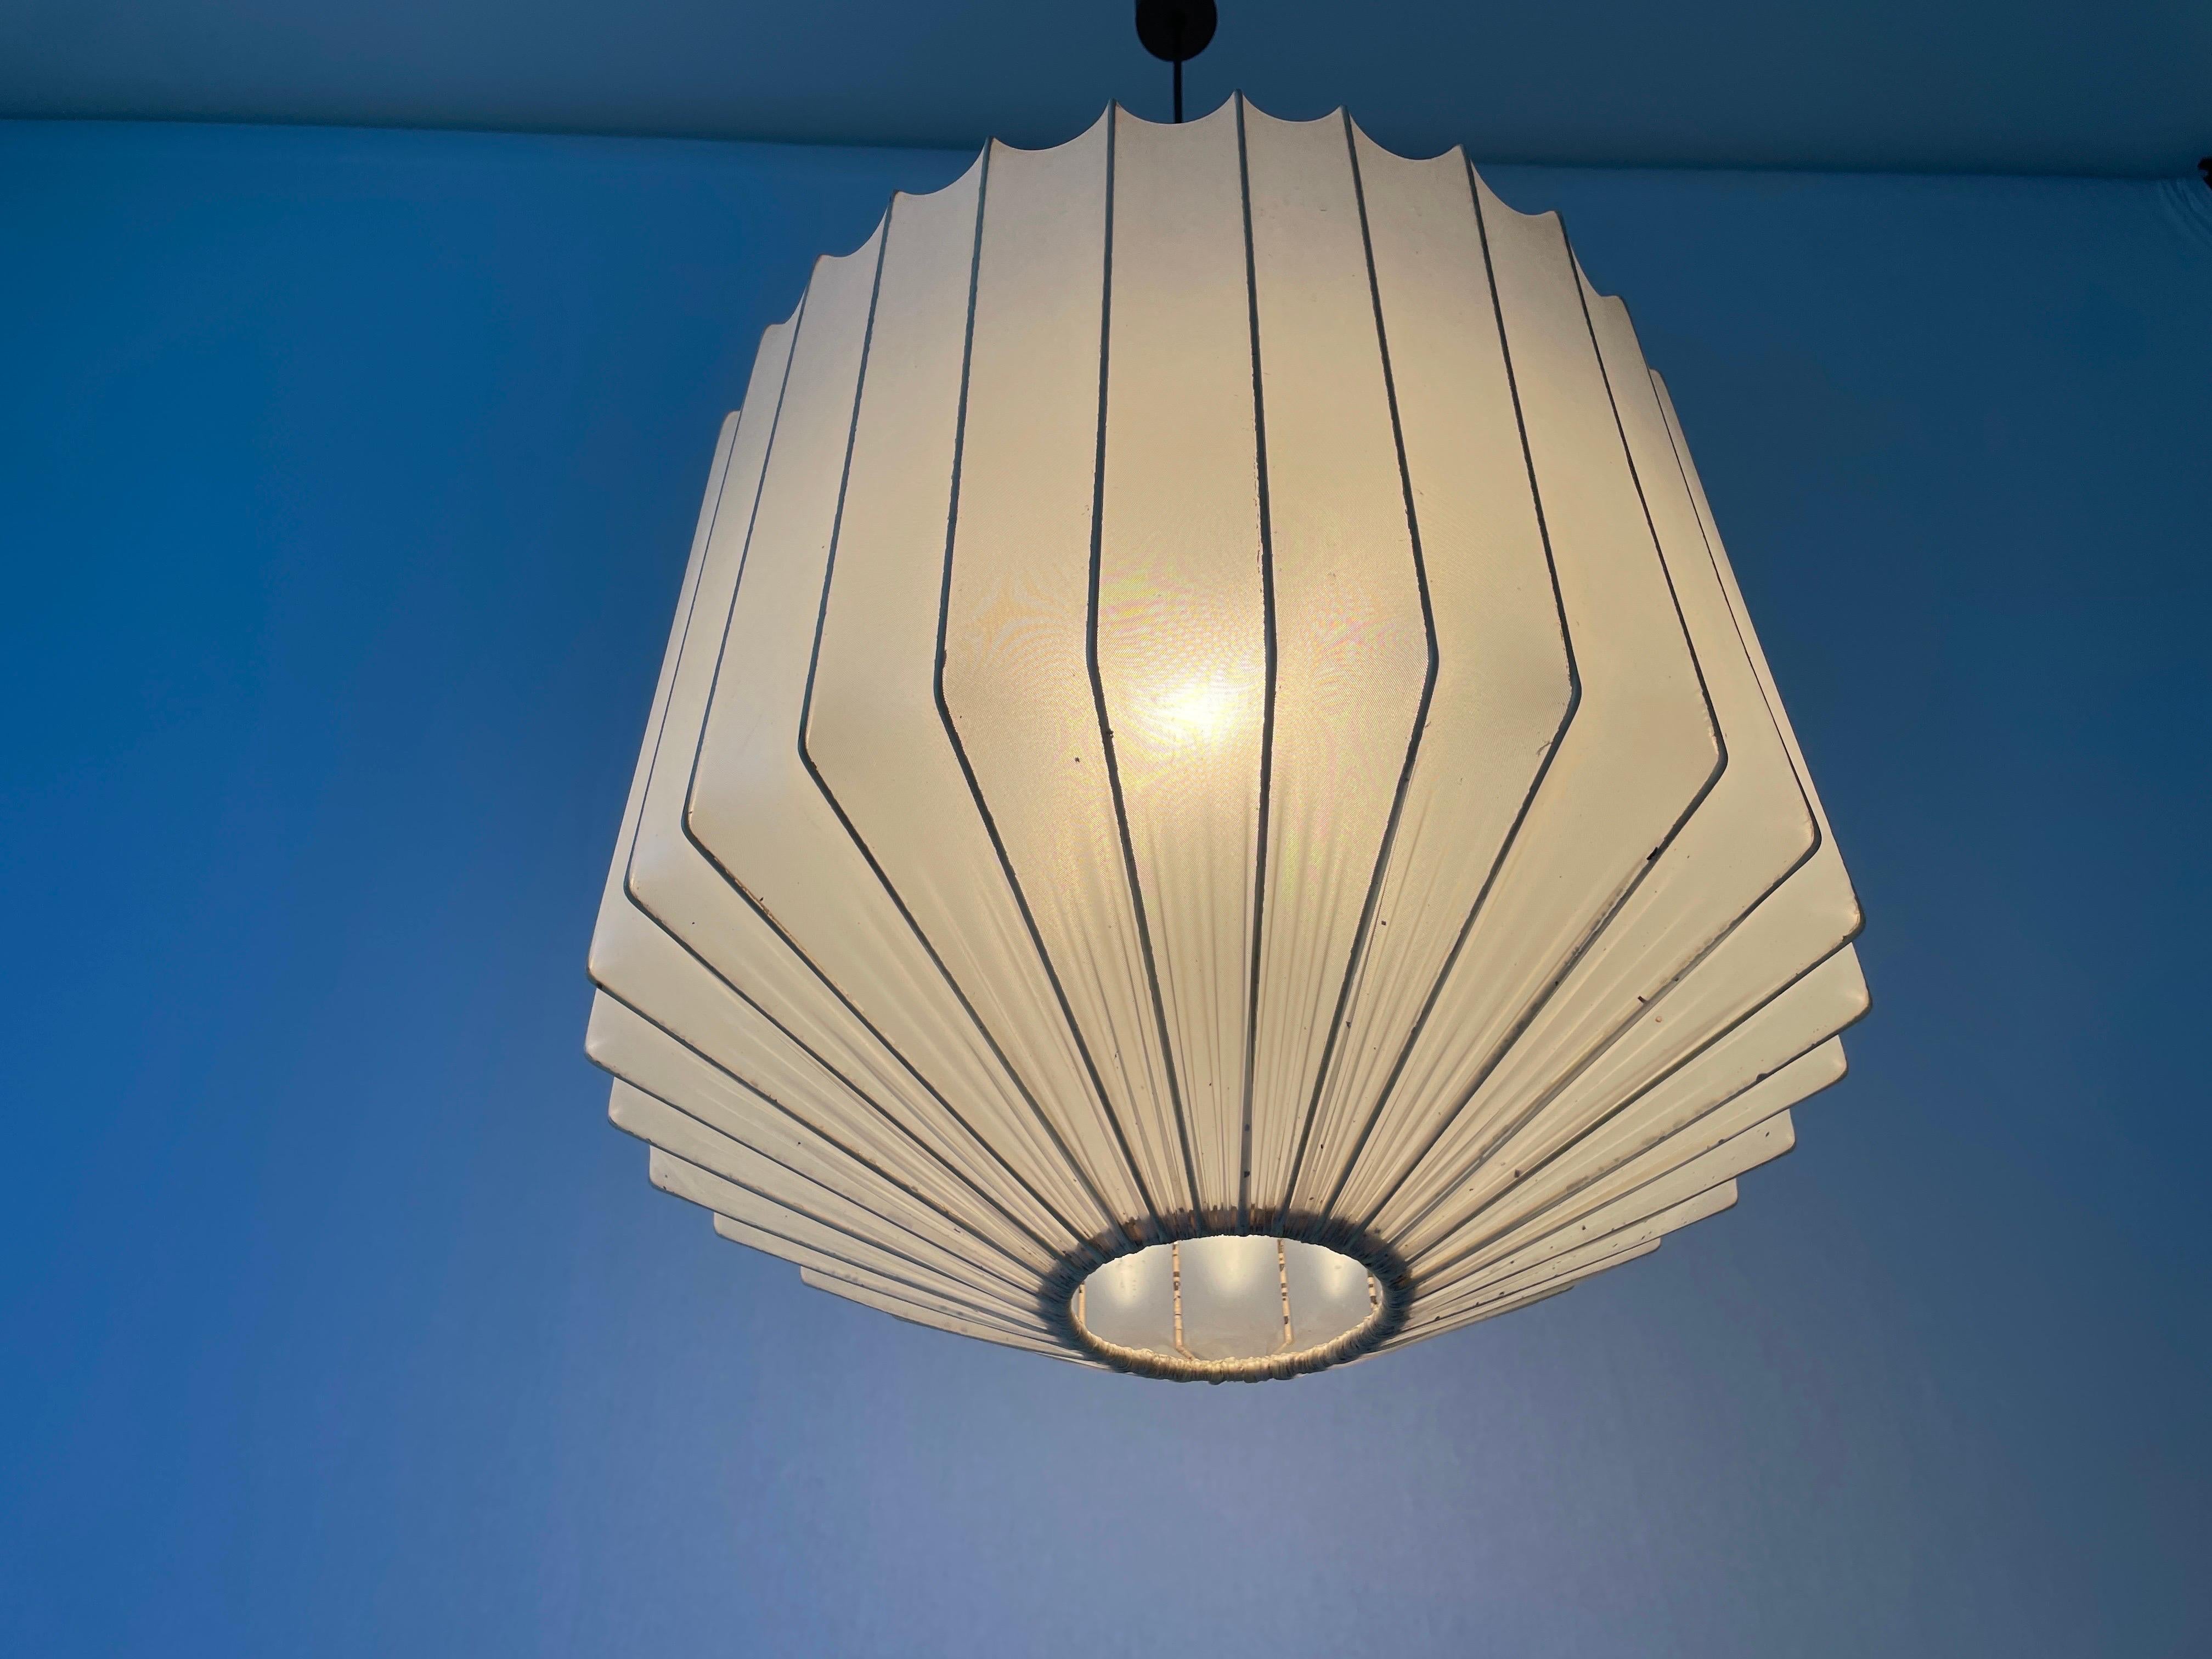 Satin Silk Fabric Ceiling Lamp in Cocoon Shape, 1960s, Italy For Sale 6